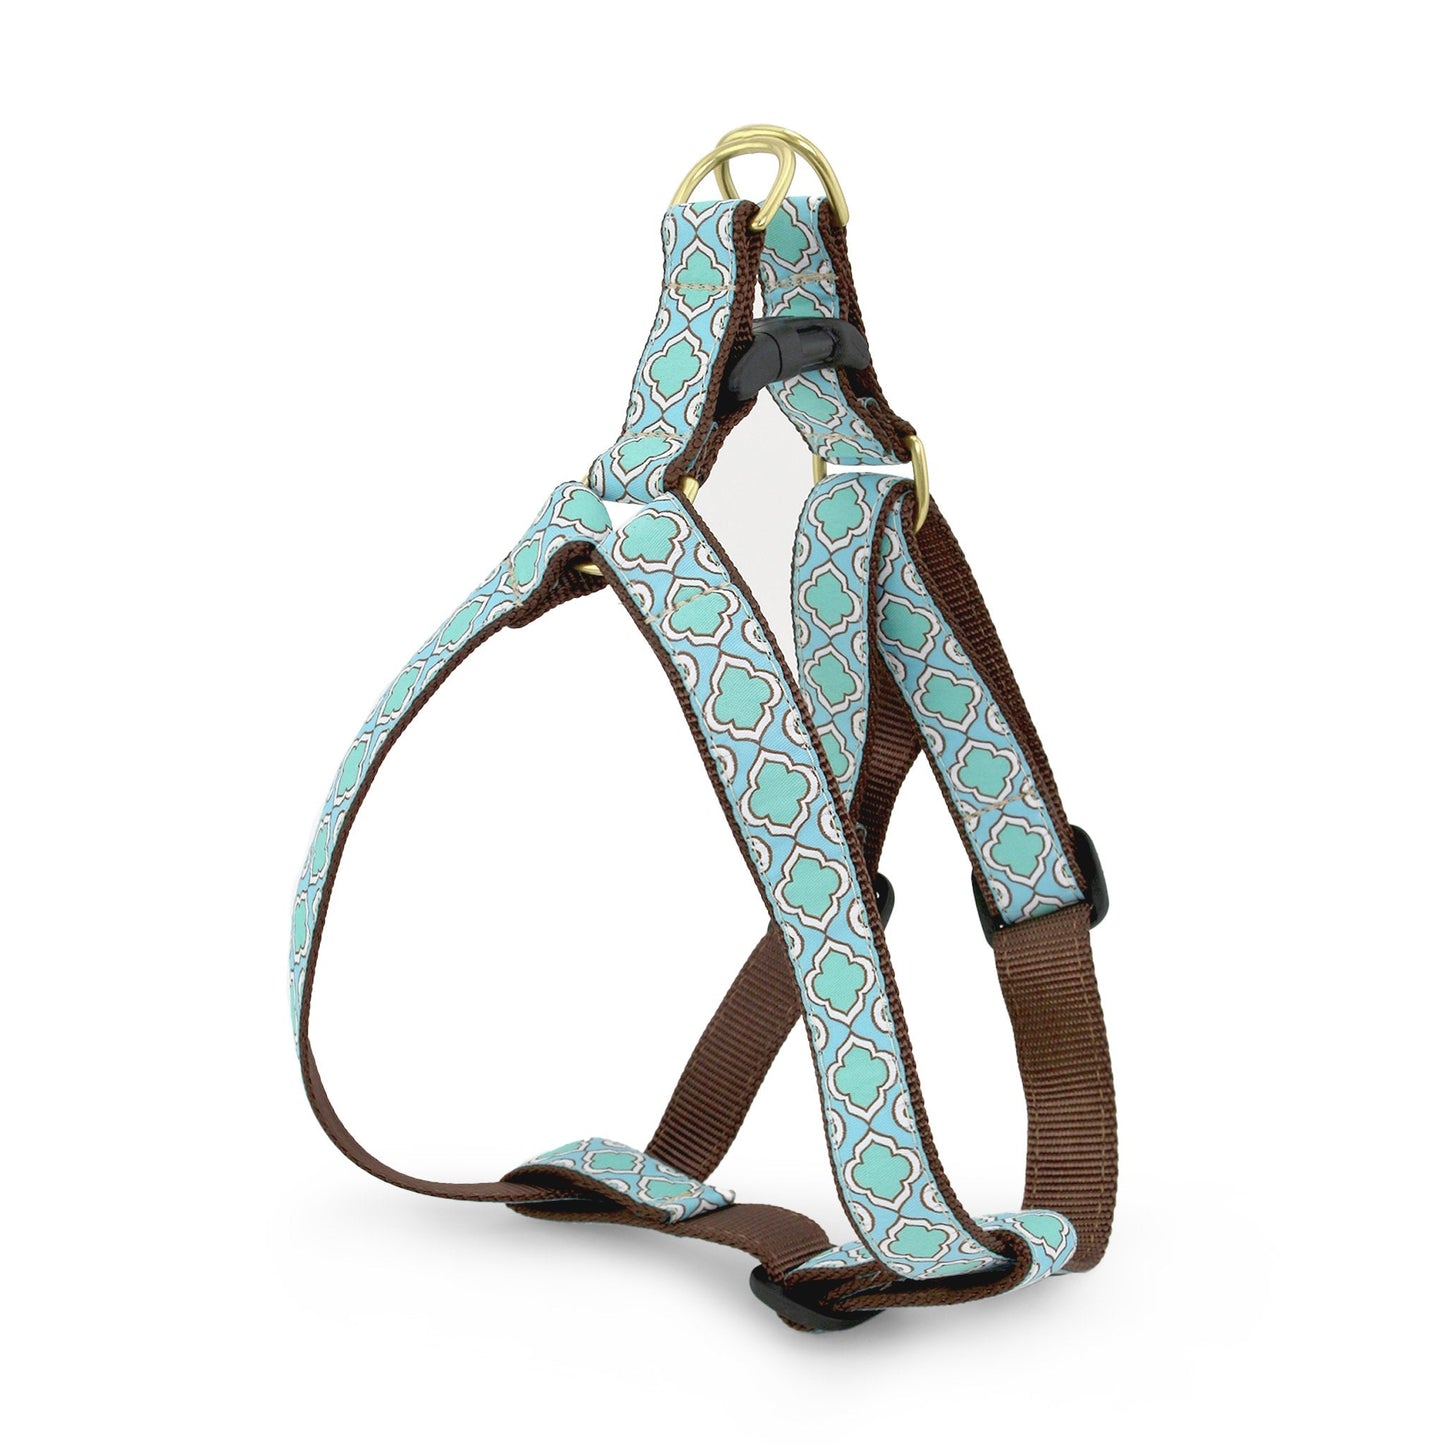 Seaglass Dog Harness by Up Country